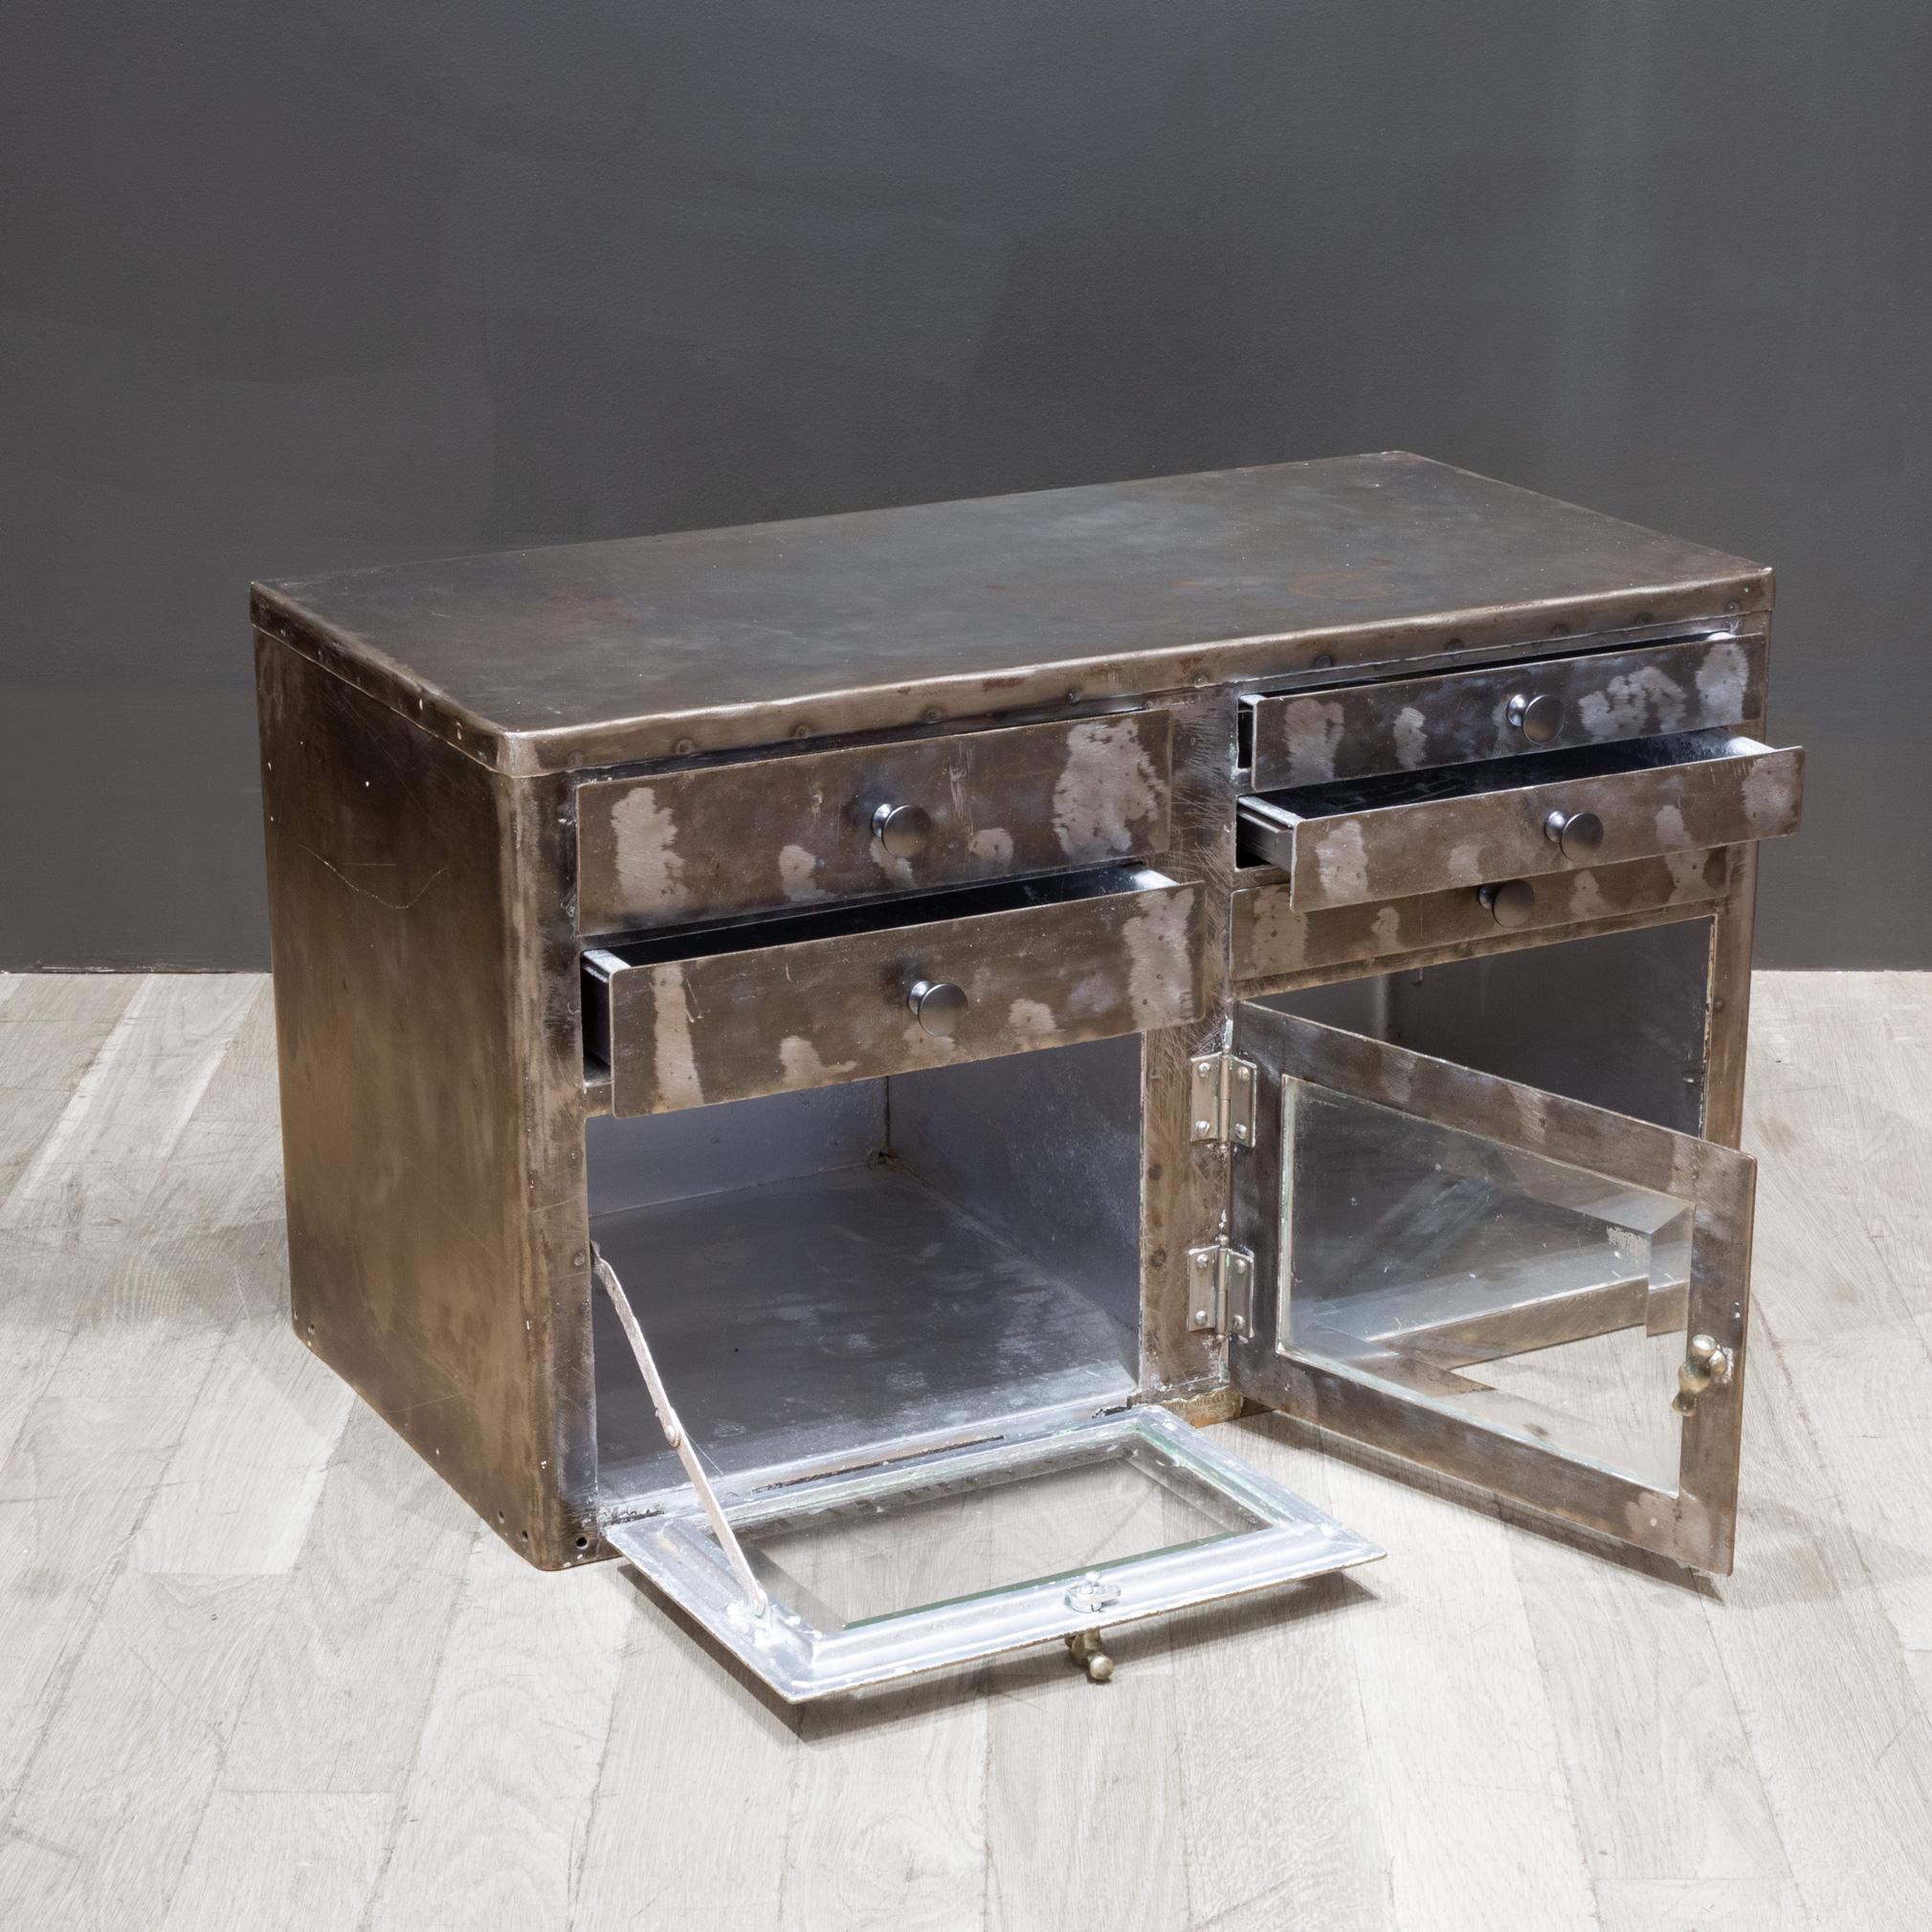 ABOUT

An early 20th century stainless steel hospital operating room supply and instrument cabinet used for foot surgeries. Two large drawers, three smaller drawers and two compartments. Original thick, beveled glass. Brass plated handles. Original